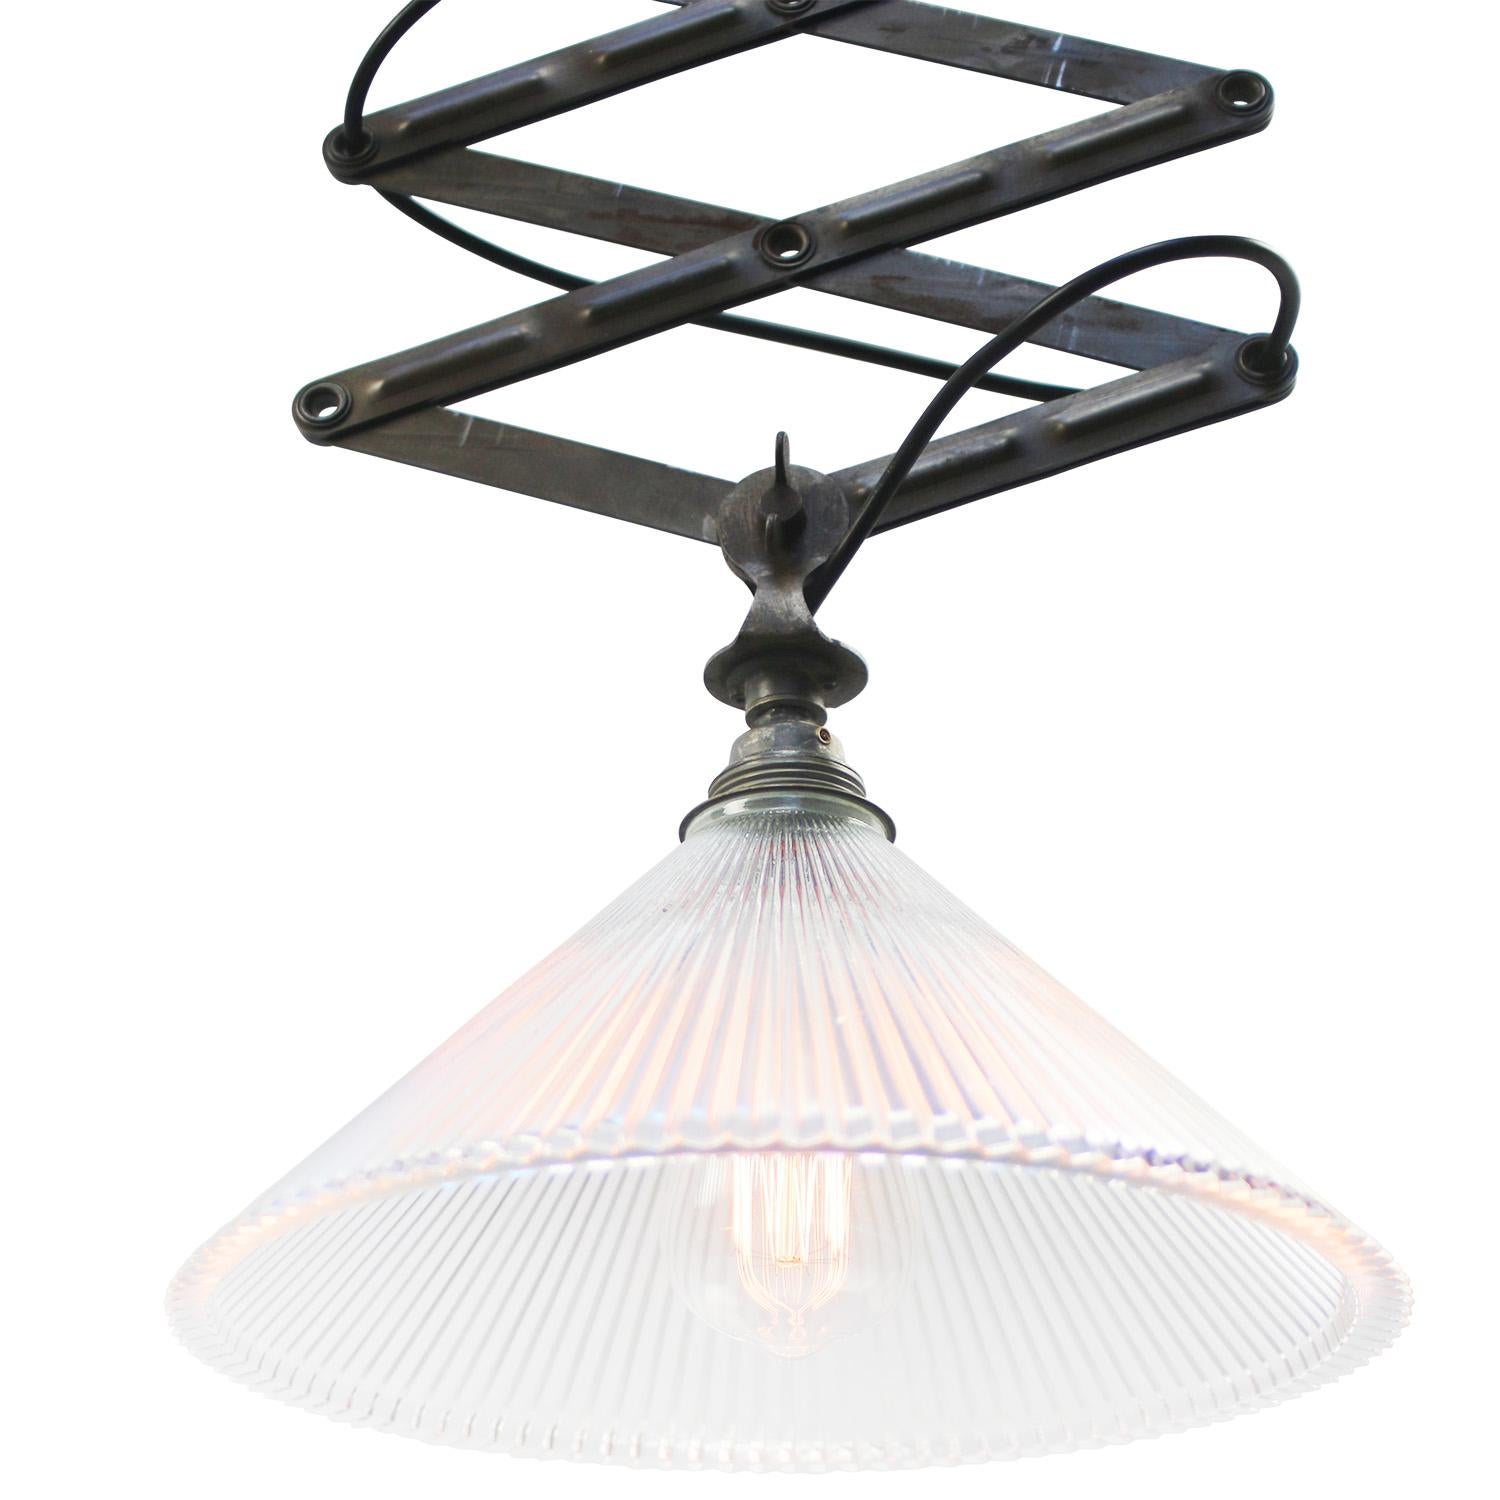 Iron scissor pendant, flush mount.
Adjustable in length and angle
Holophane clear glass shade

Shade size: diameter 30 cm
90° angle adjustable shade

as shown on picture 75 cm
min. length 40 cm
max. length 170 cm

metal mounting plate: 12 × 7